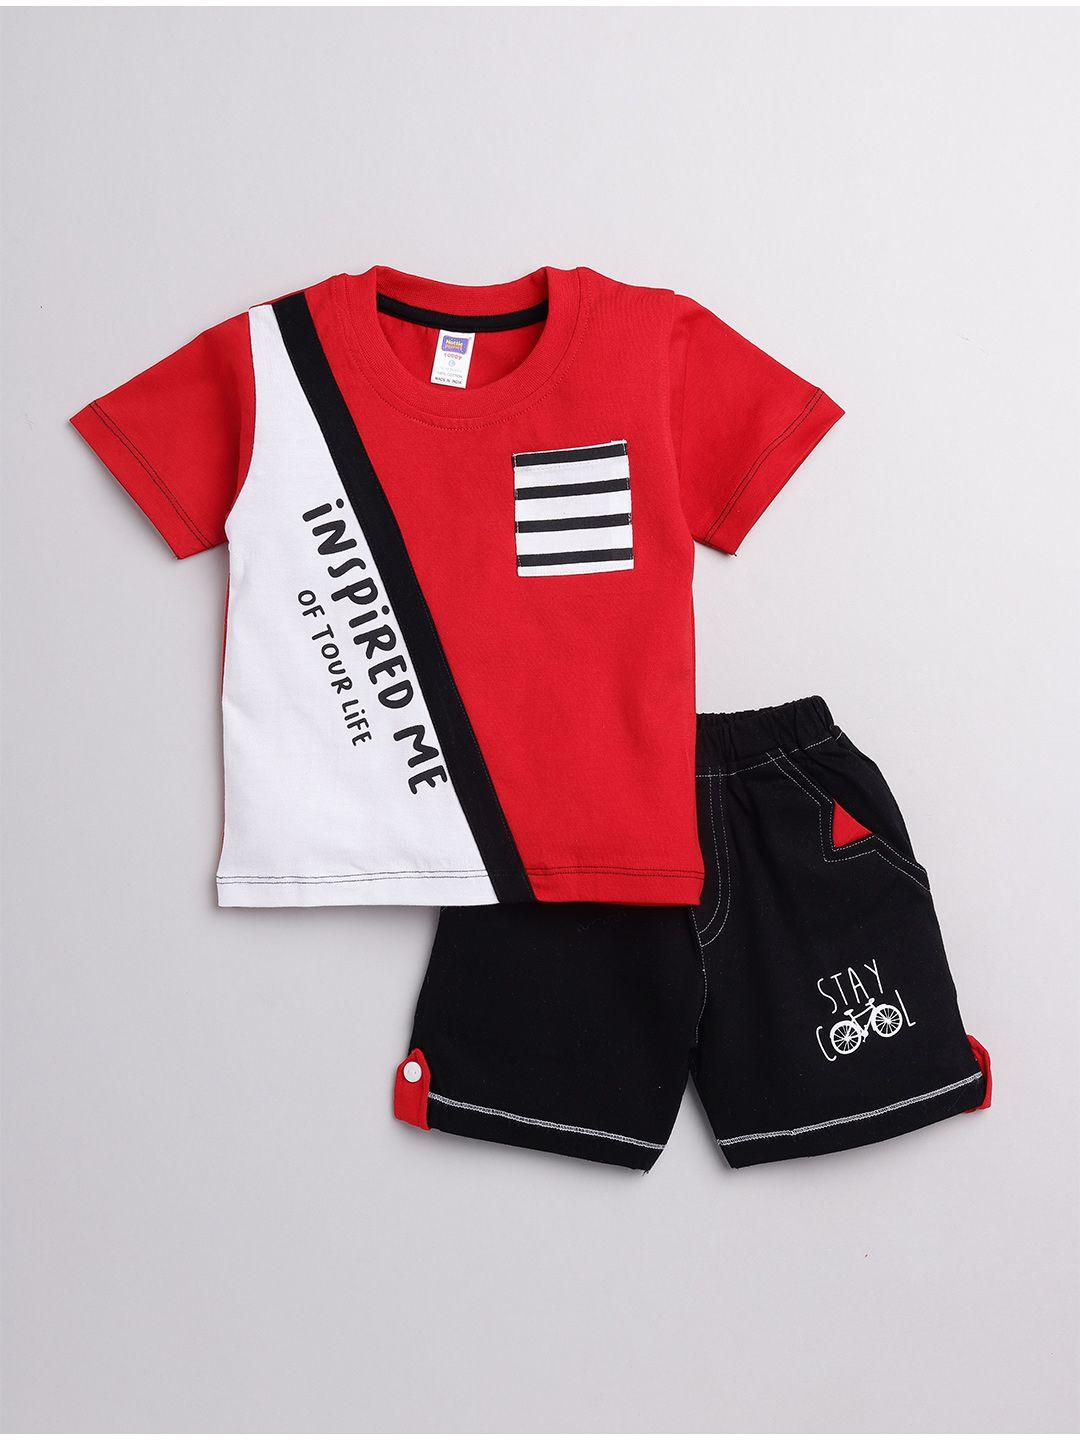 nottie planet boys red & black pure cotton solid printed t-shirt & shorts